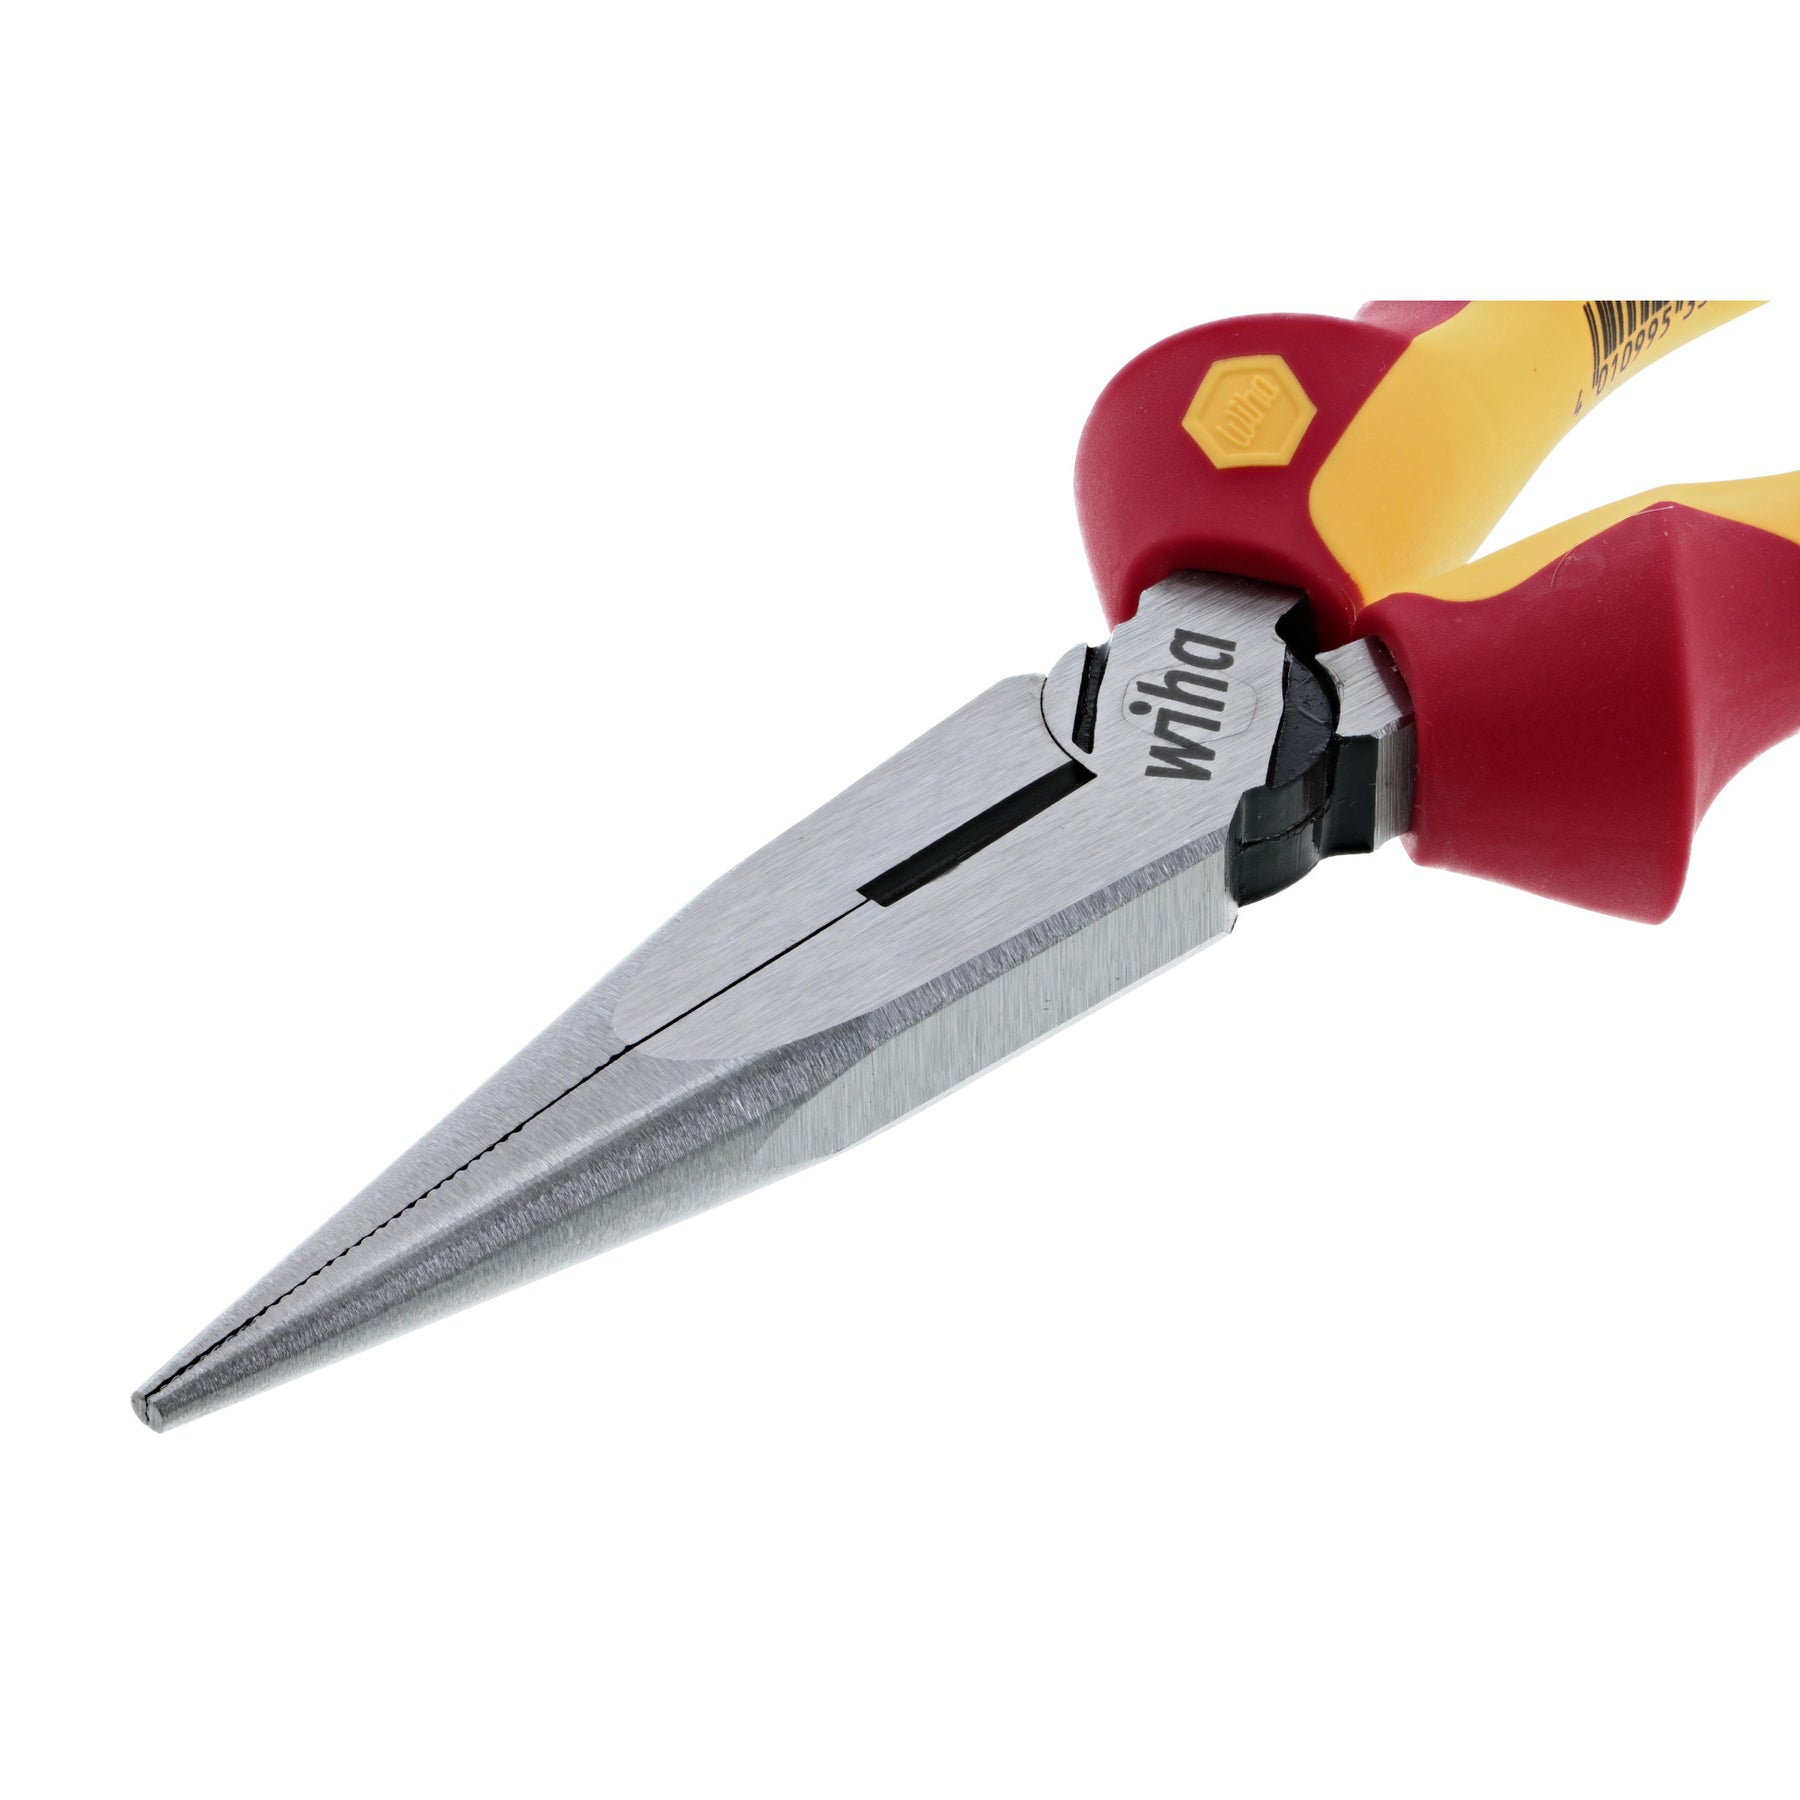 Wiha 32923 Insulated Industrial Long Nose Pliers 8 in.